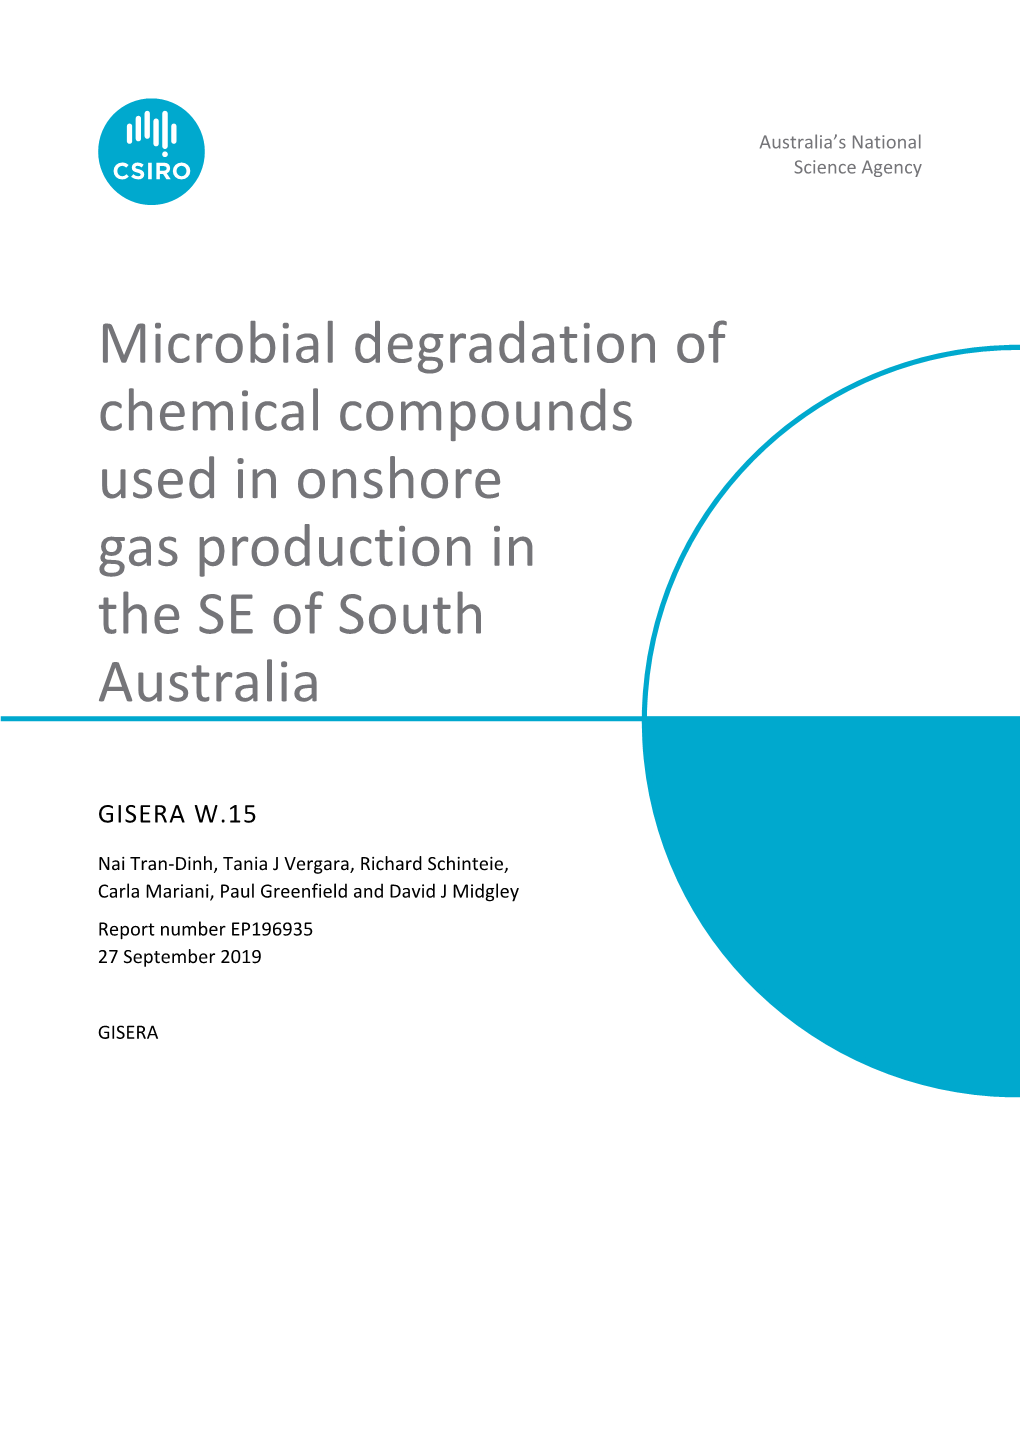 Microbial Degradation of Chemical Compounds Used in Onshore Gas Production in the SE of South Australia